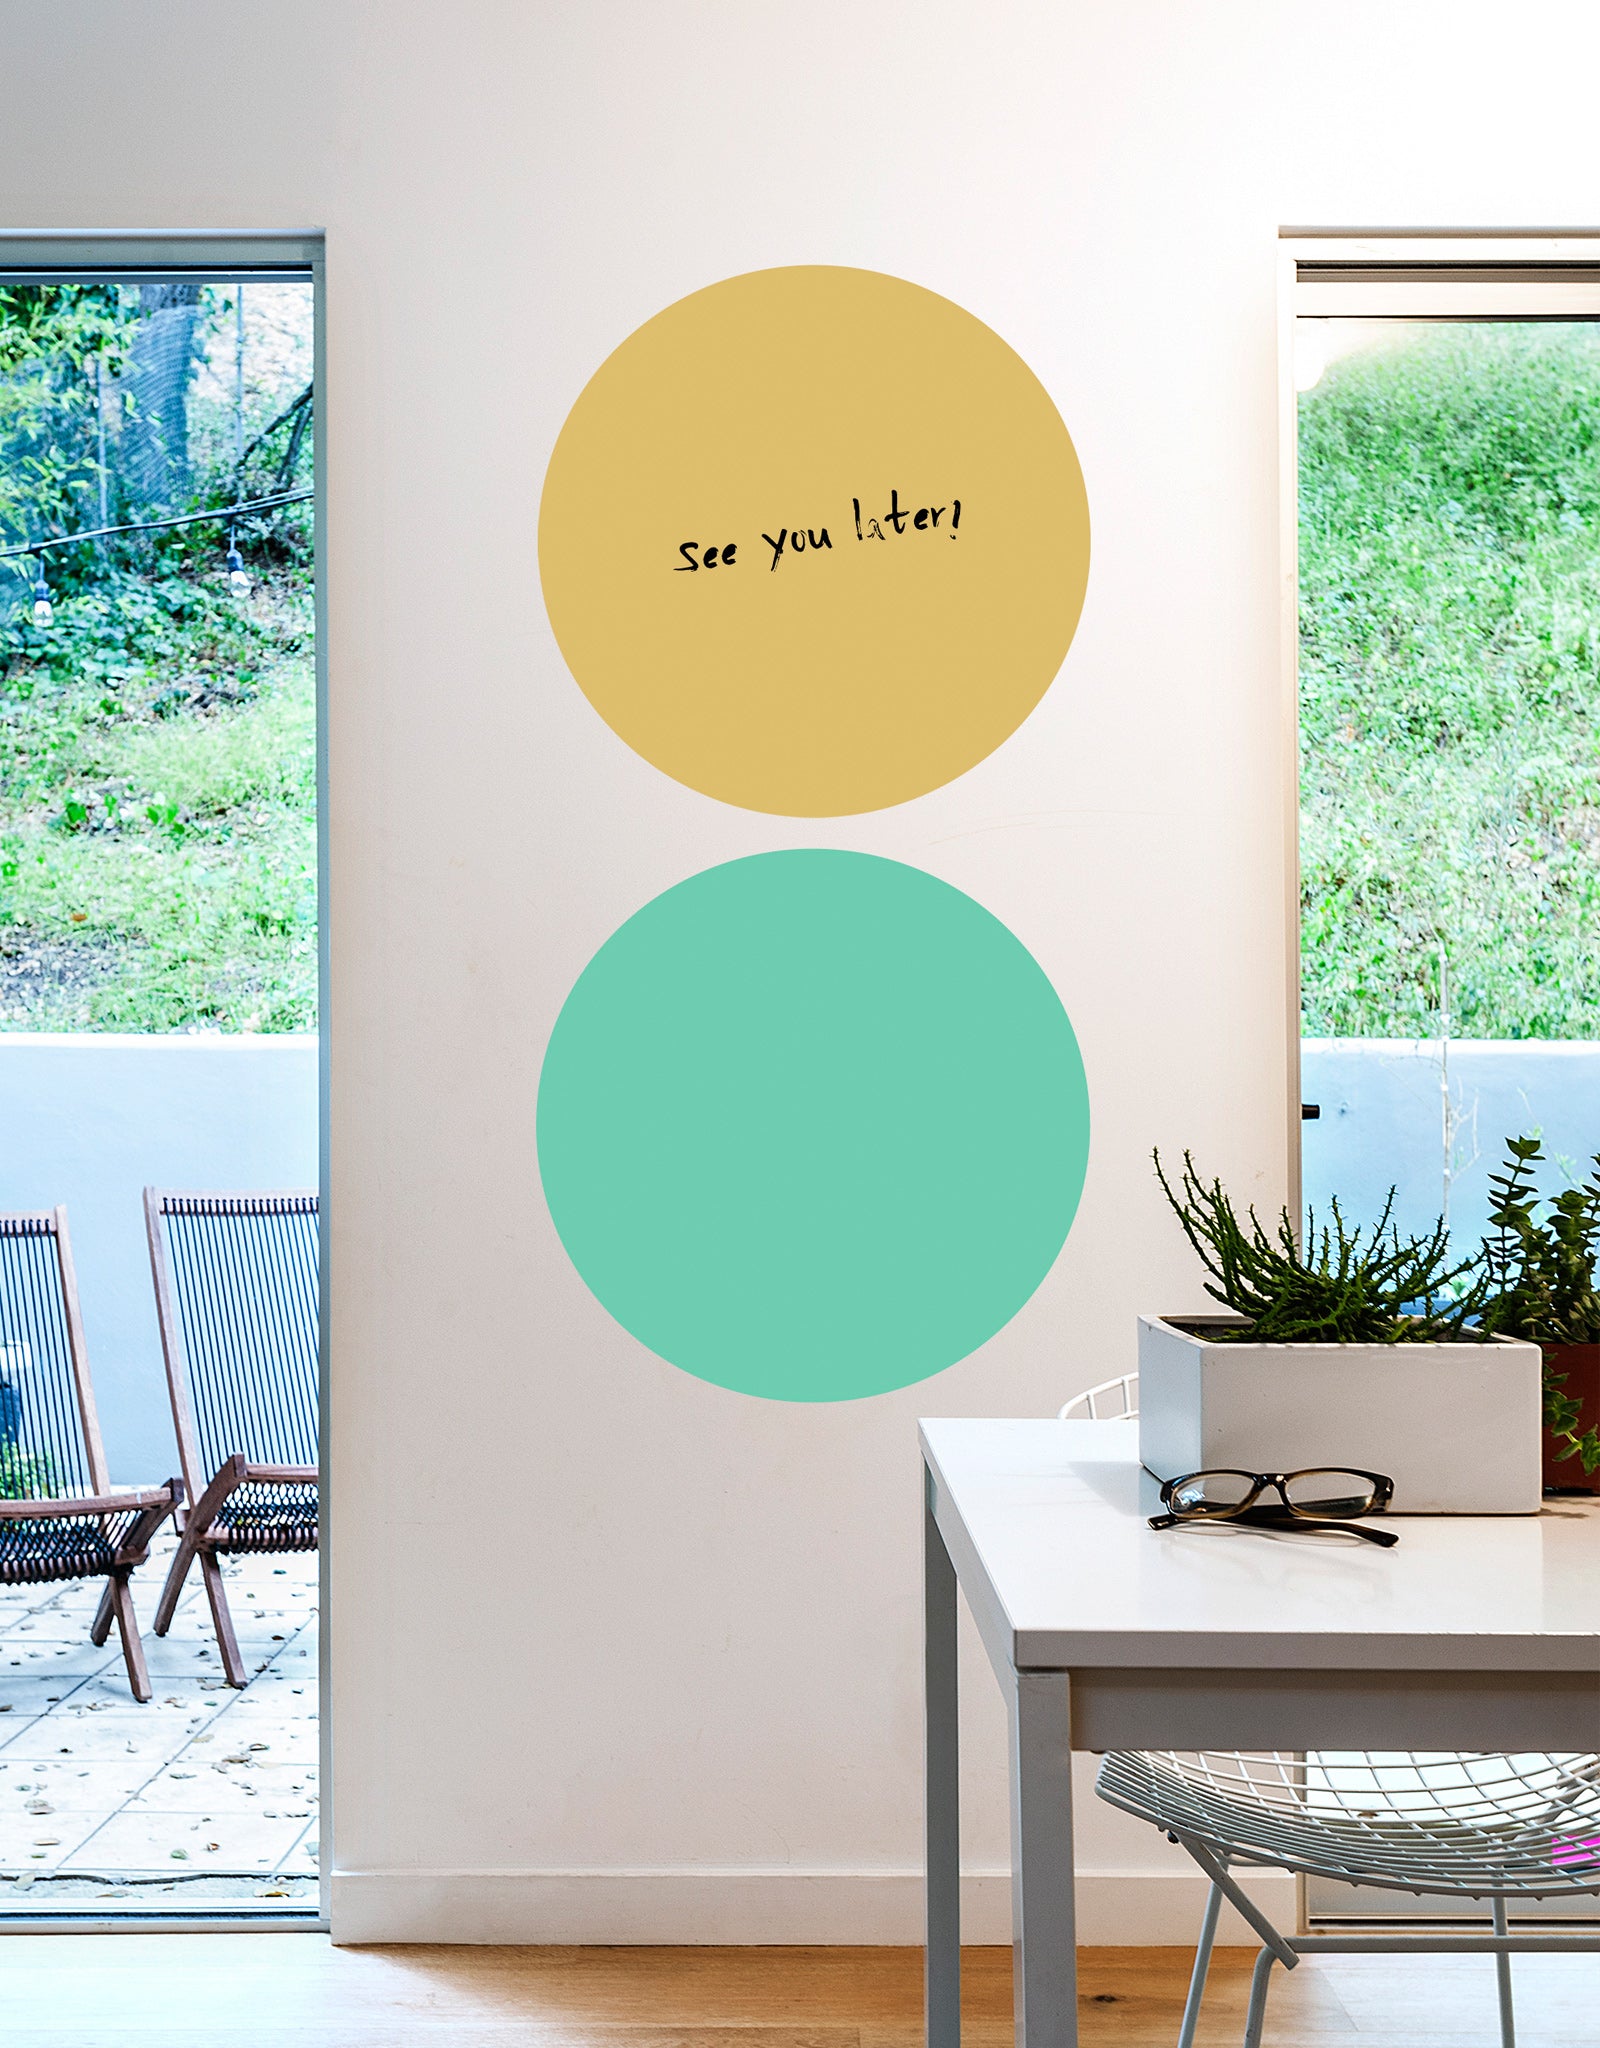 The Not Whiteboard Dry Erase Removable Wall Decal | Colorful Whiteboard Alternative | 16 x 26 Inches by BLIK Surface Graphics (Mint)